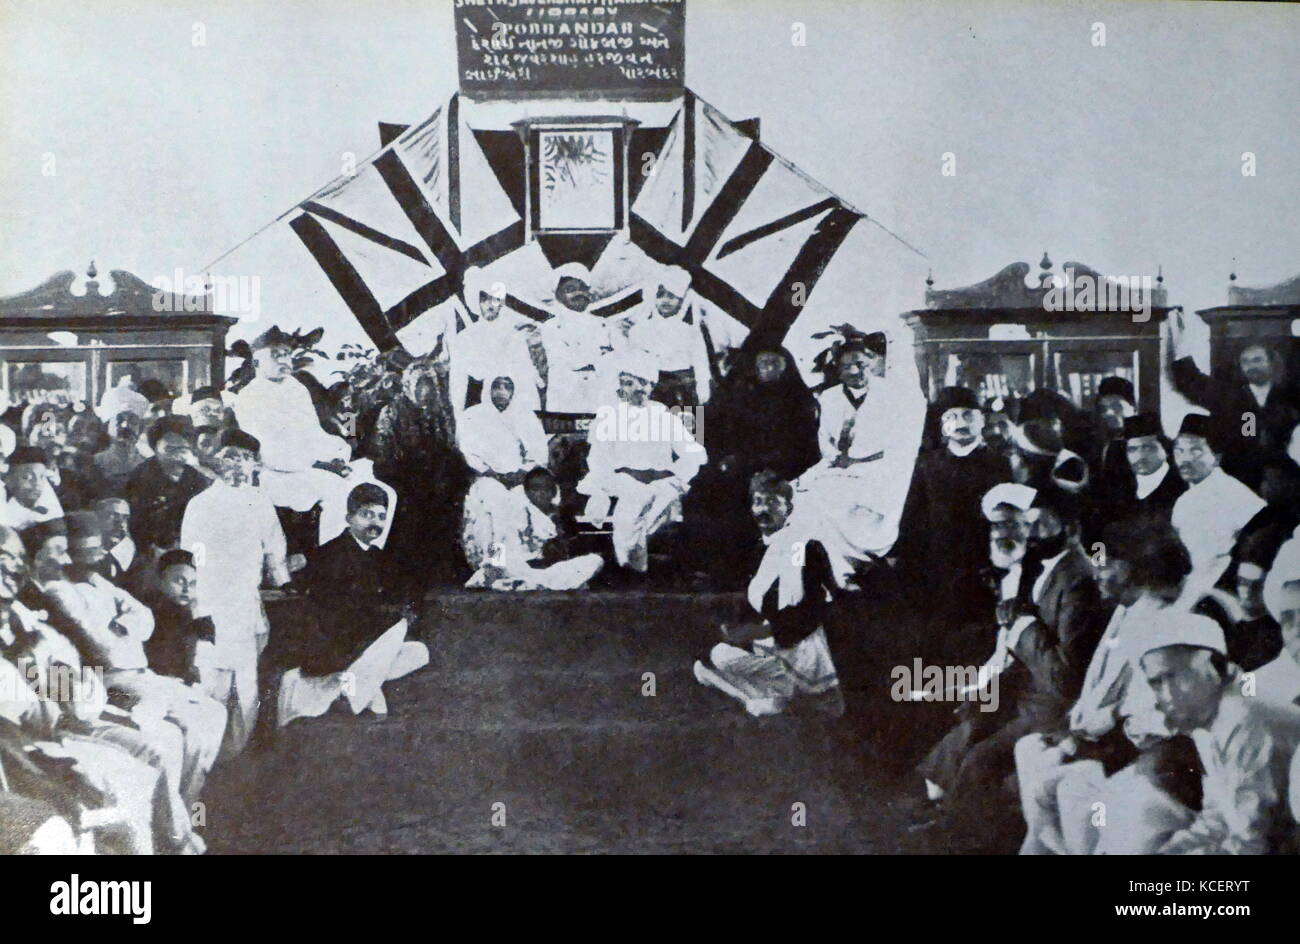 Mohandas Karamchand Gandhi and Kasturba, at the opening of a library in Porhandar, 1915. Gandhi (2 October 1869 – 30 January 1948), was the preeminent leader of the Indian independence movement in British-ruled India. Employing nonviolent civil disobedience, Gandhi led India to independence and inspired movements for civil rights and freedom across the world. Stock Photo